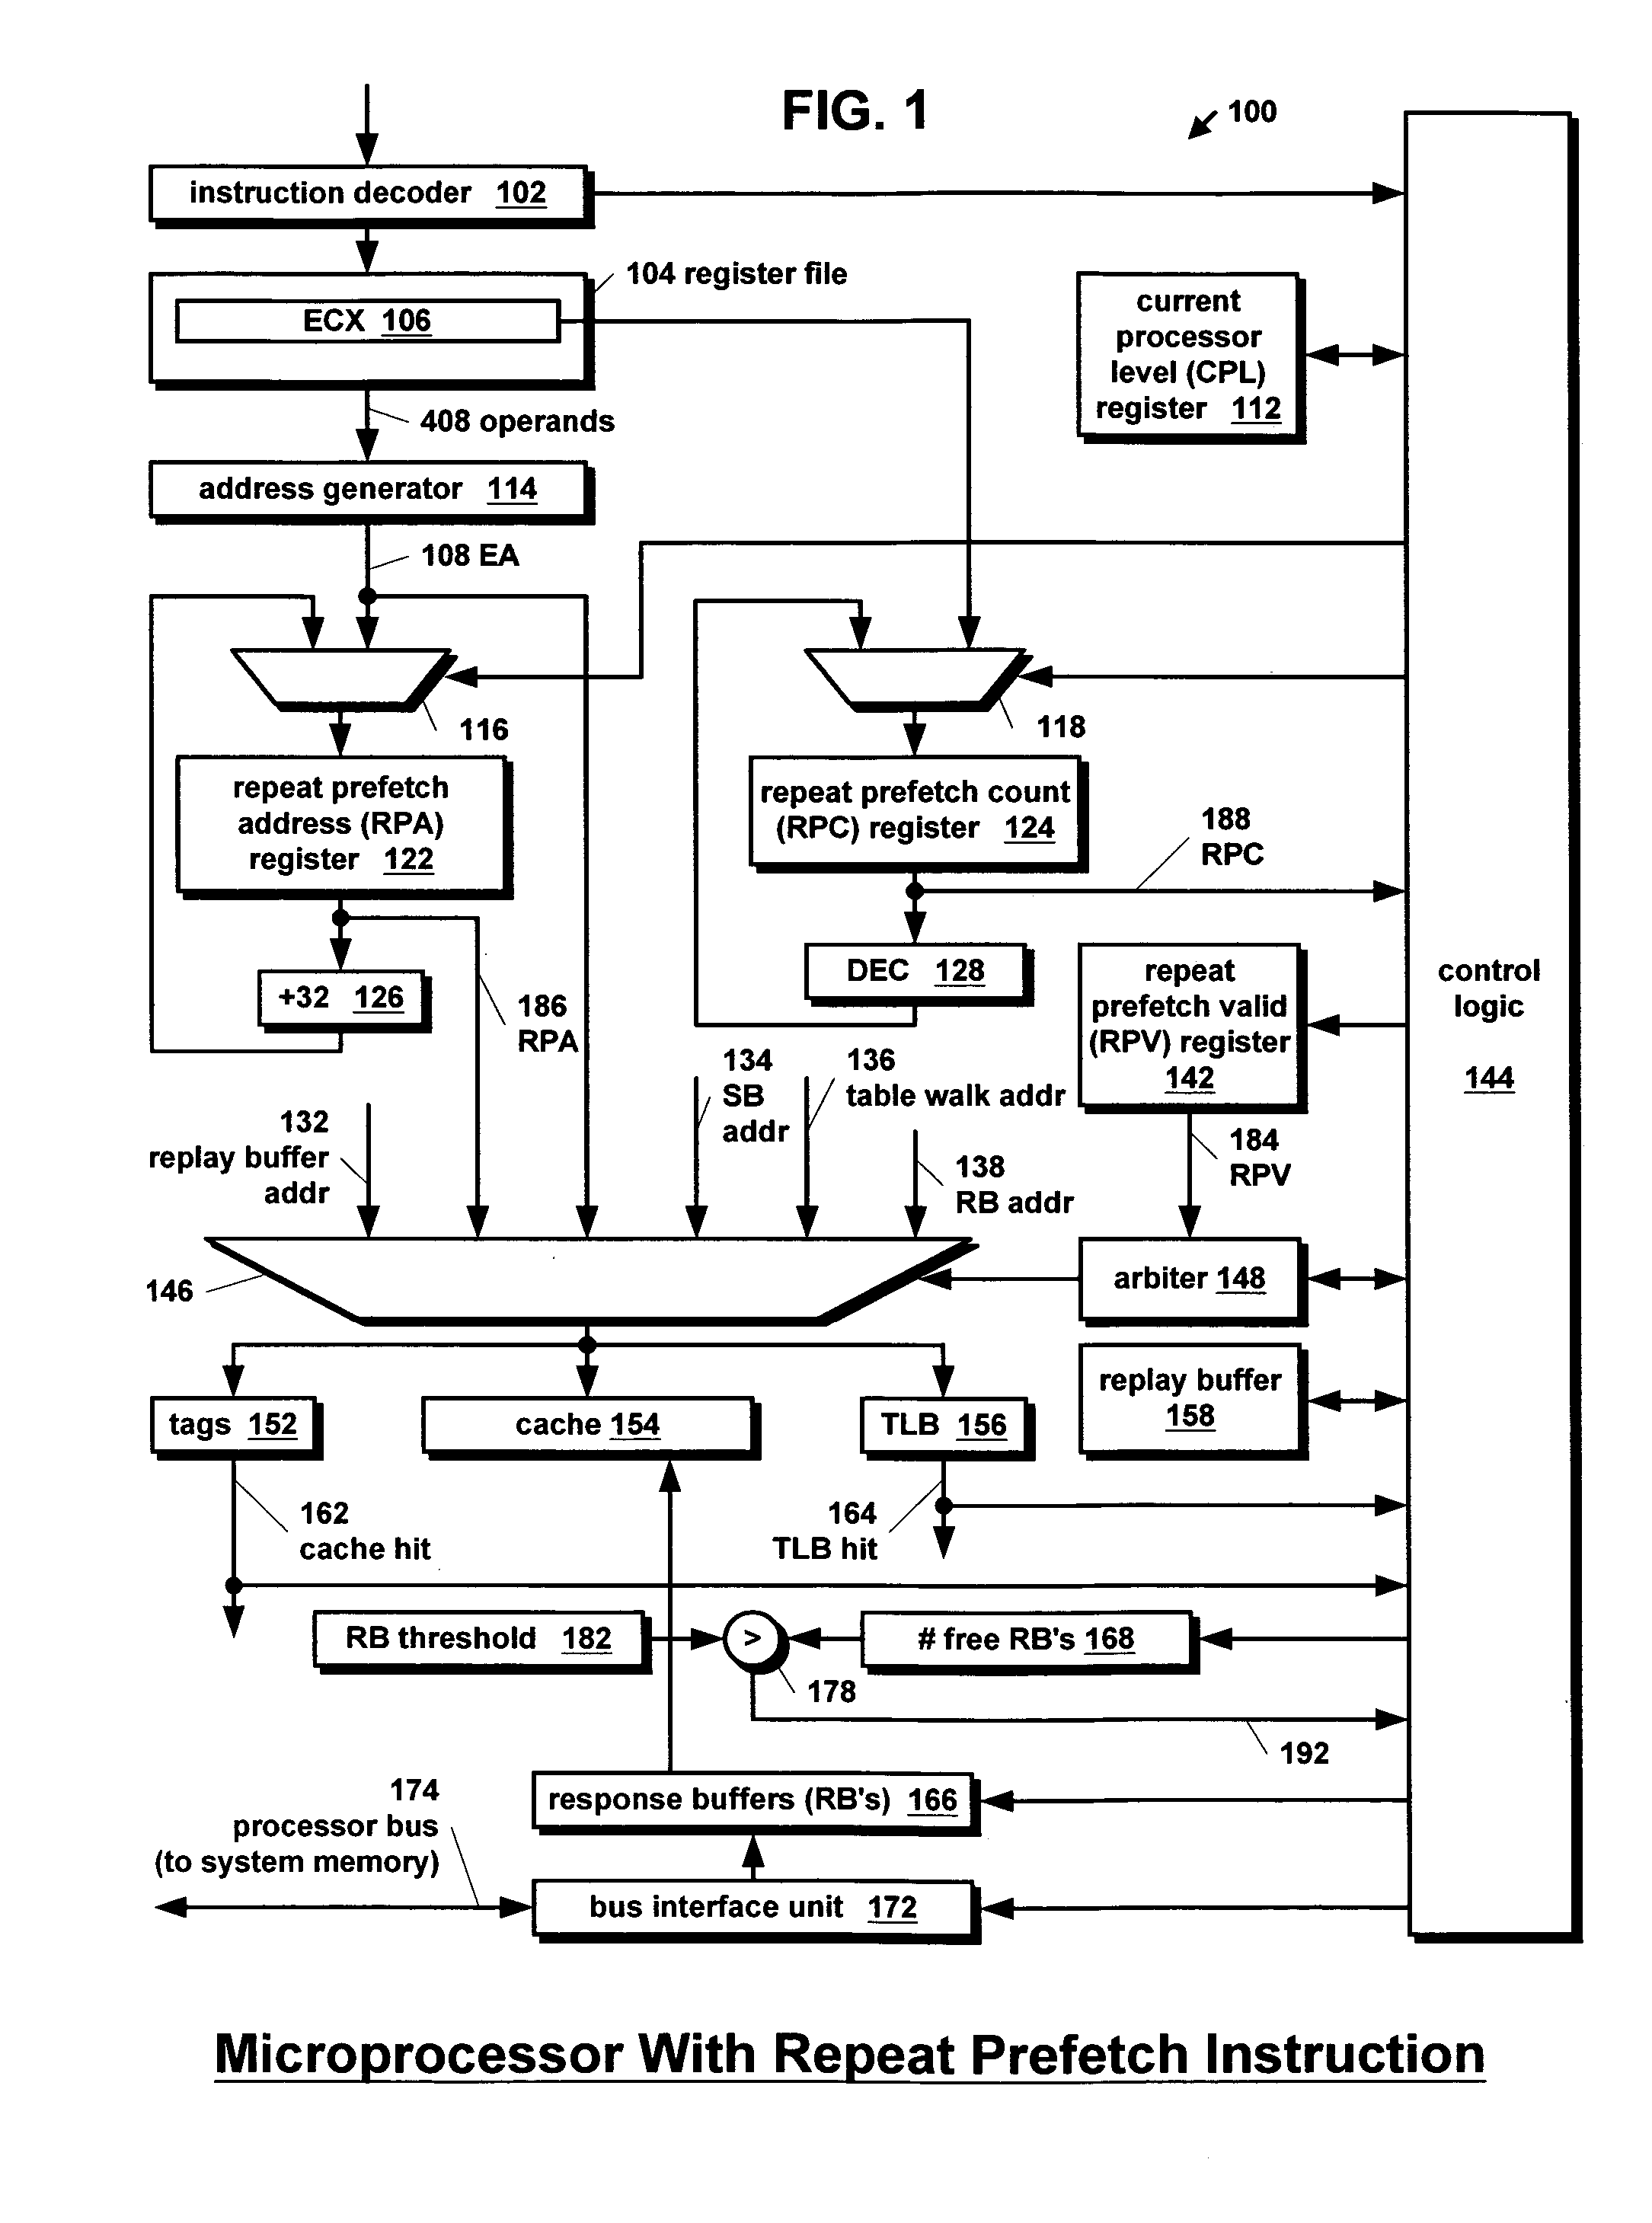 Microprocessor with repeat prefetch instruction